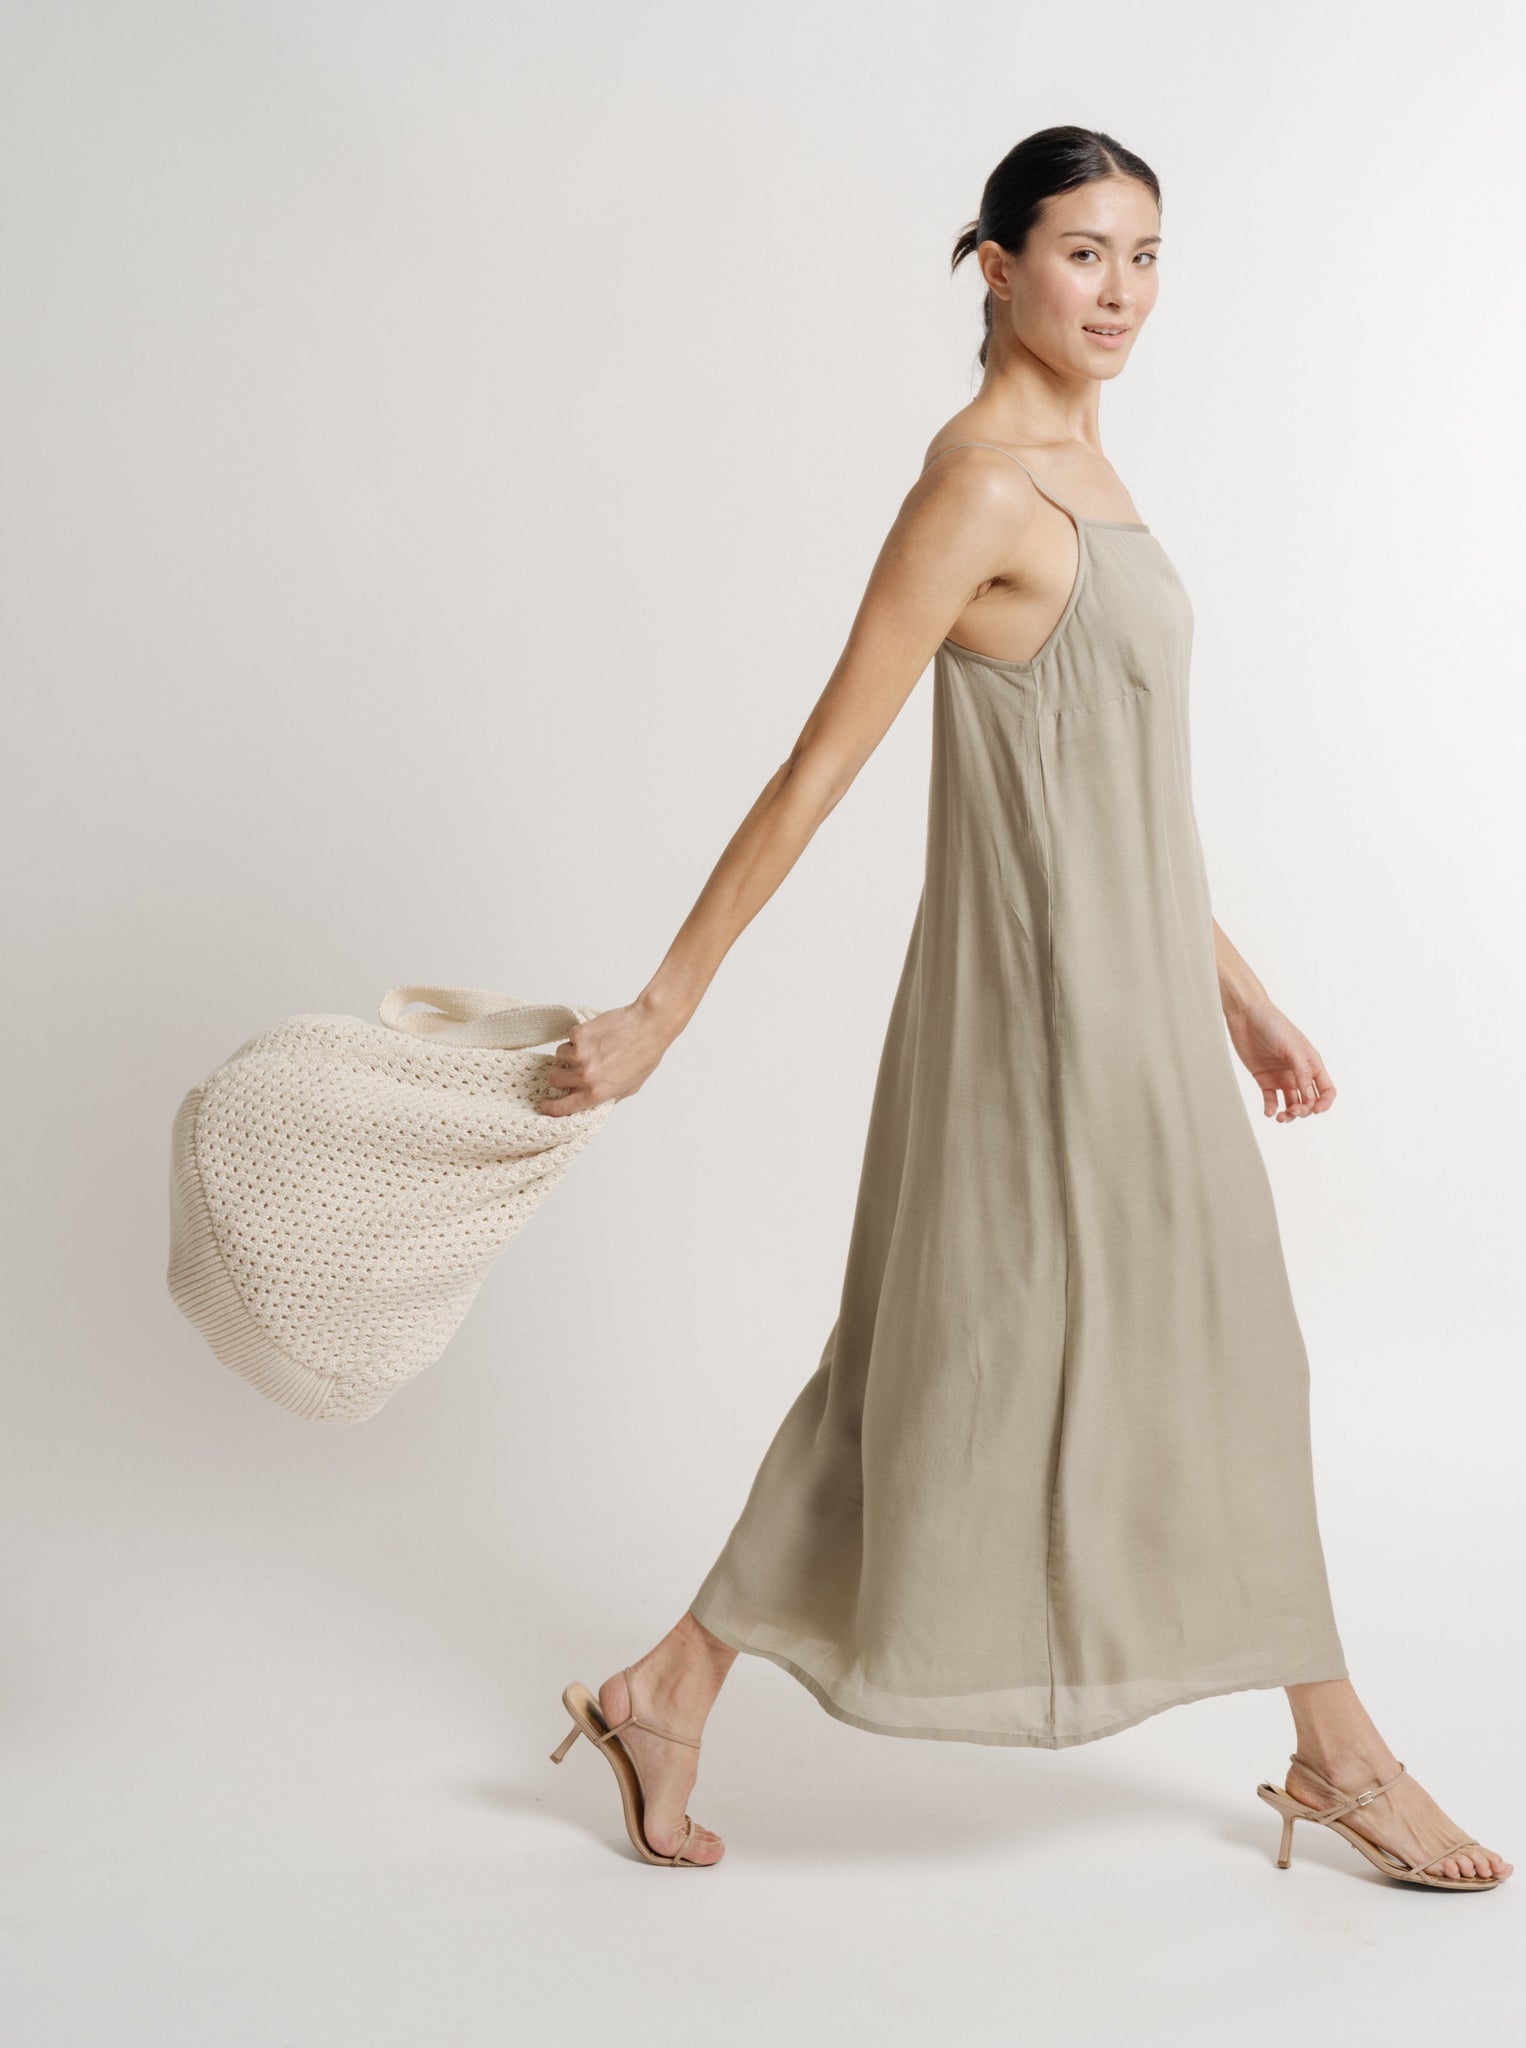 The model is wearing a sage green Bemberg Cupro Crepe dress and carrying a 90's Maxi Slip Dress - Putty - Pre-order bag, available for resort pre-orders.